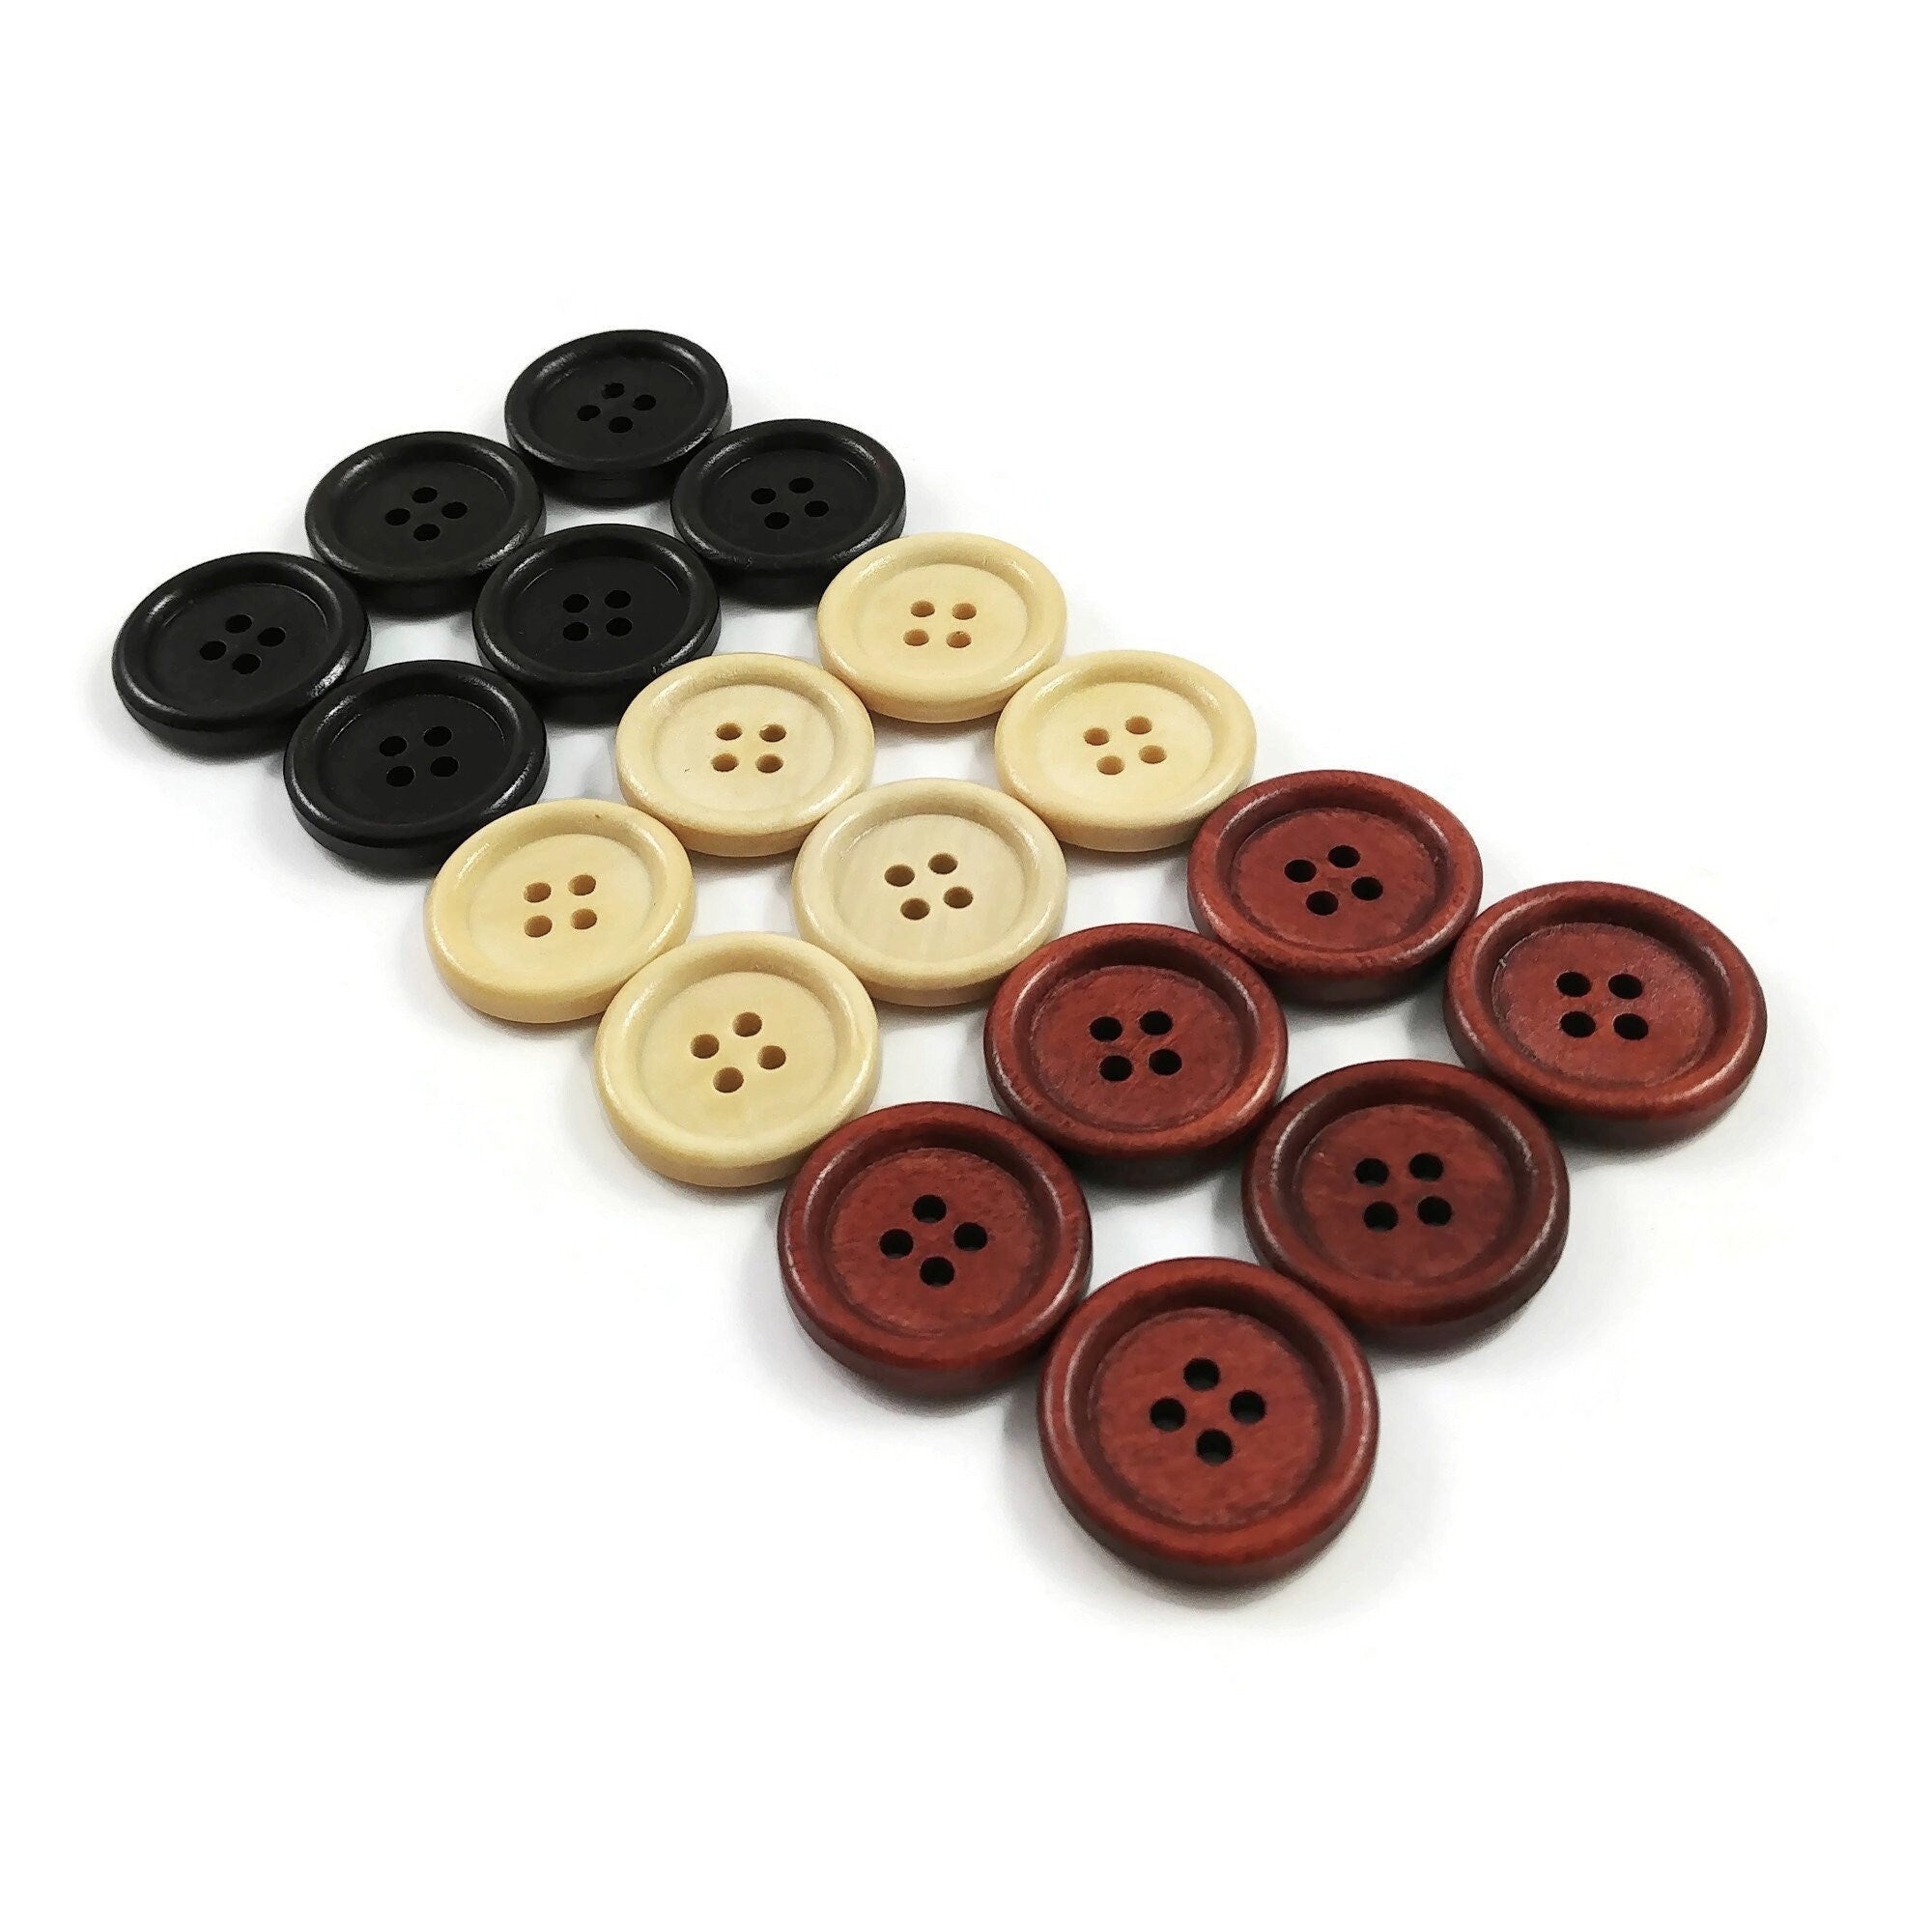 50pcs/lot Size: 12.5mm-20mm Natural Wooden Buttons for Crafts4